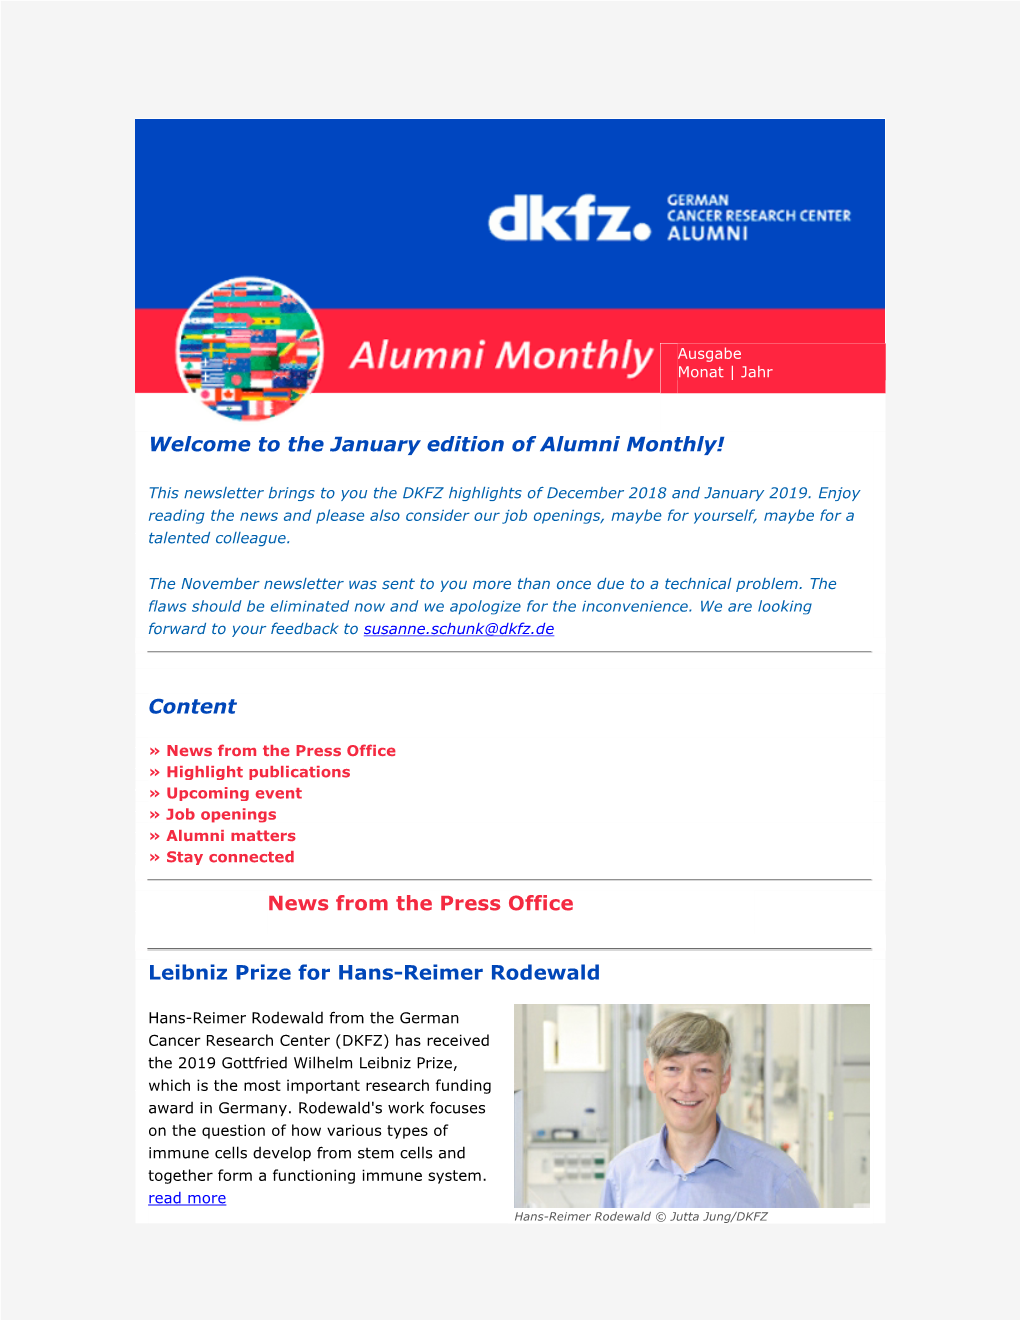 The January Edition of Alumni Monthly!